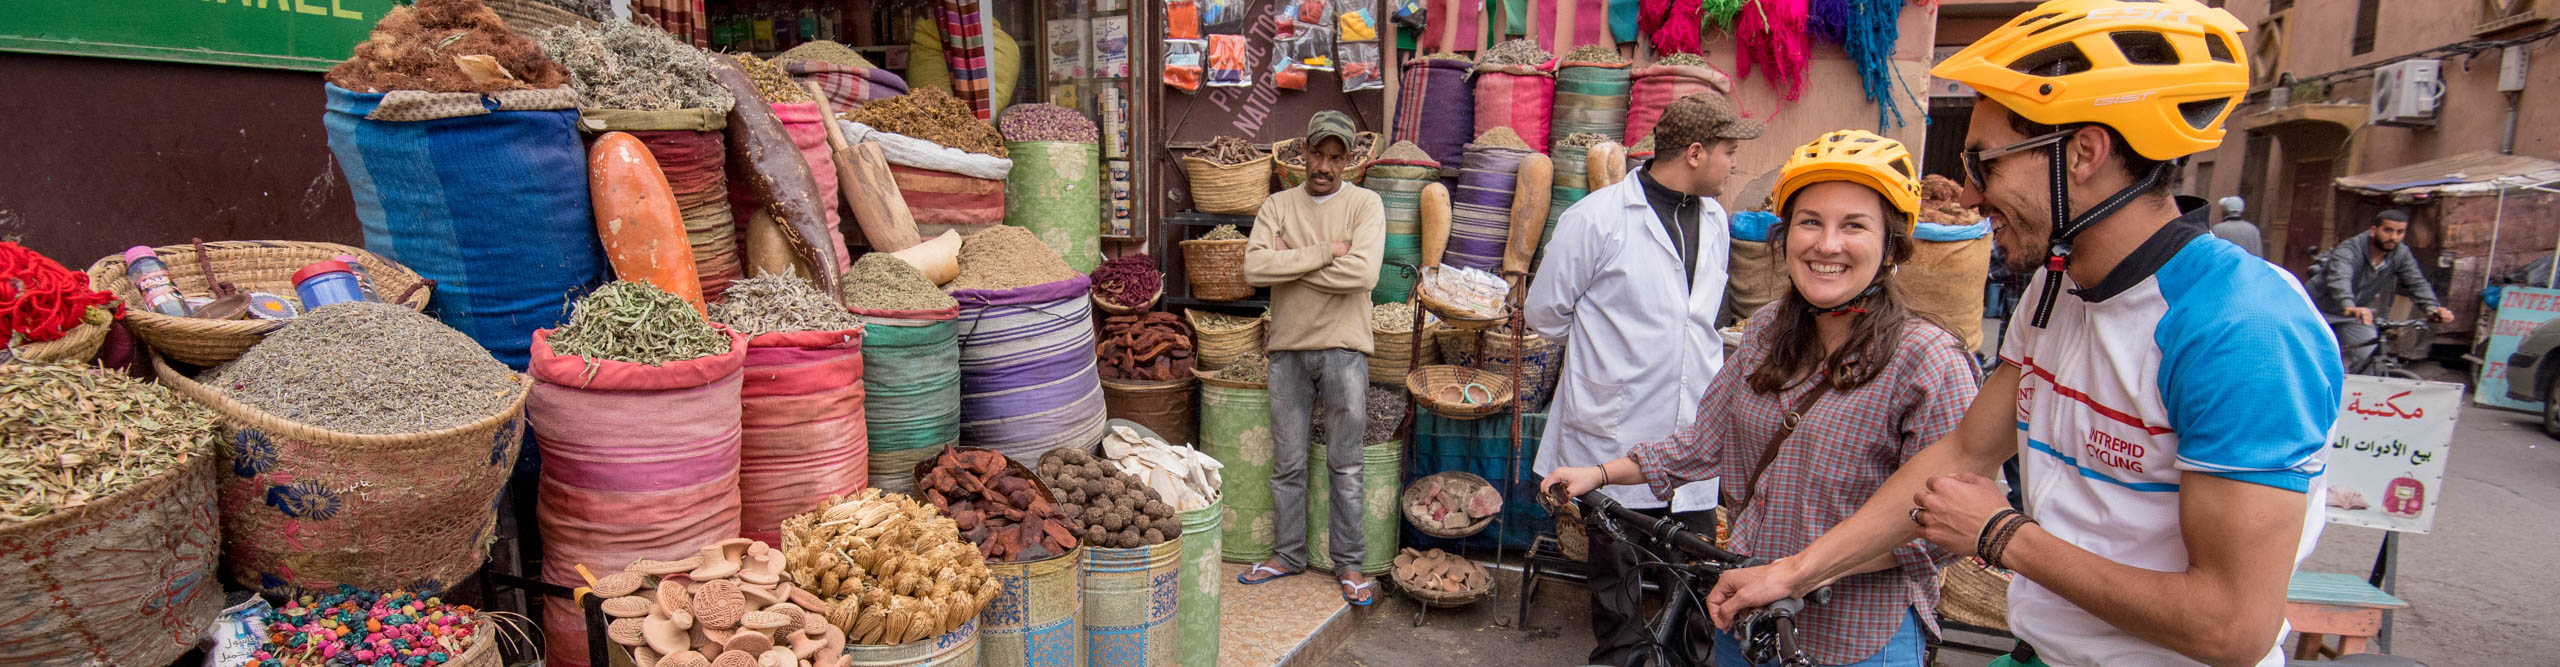 Two travellers on bikes make a stop at a spice market in Marrakech, Morocco 